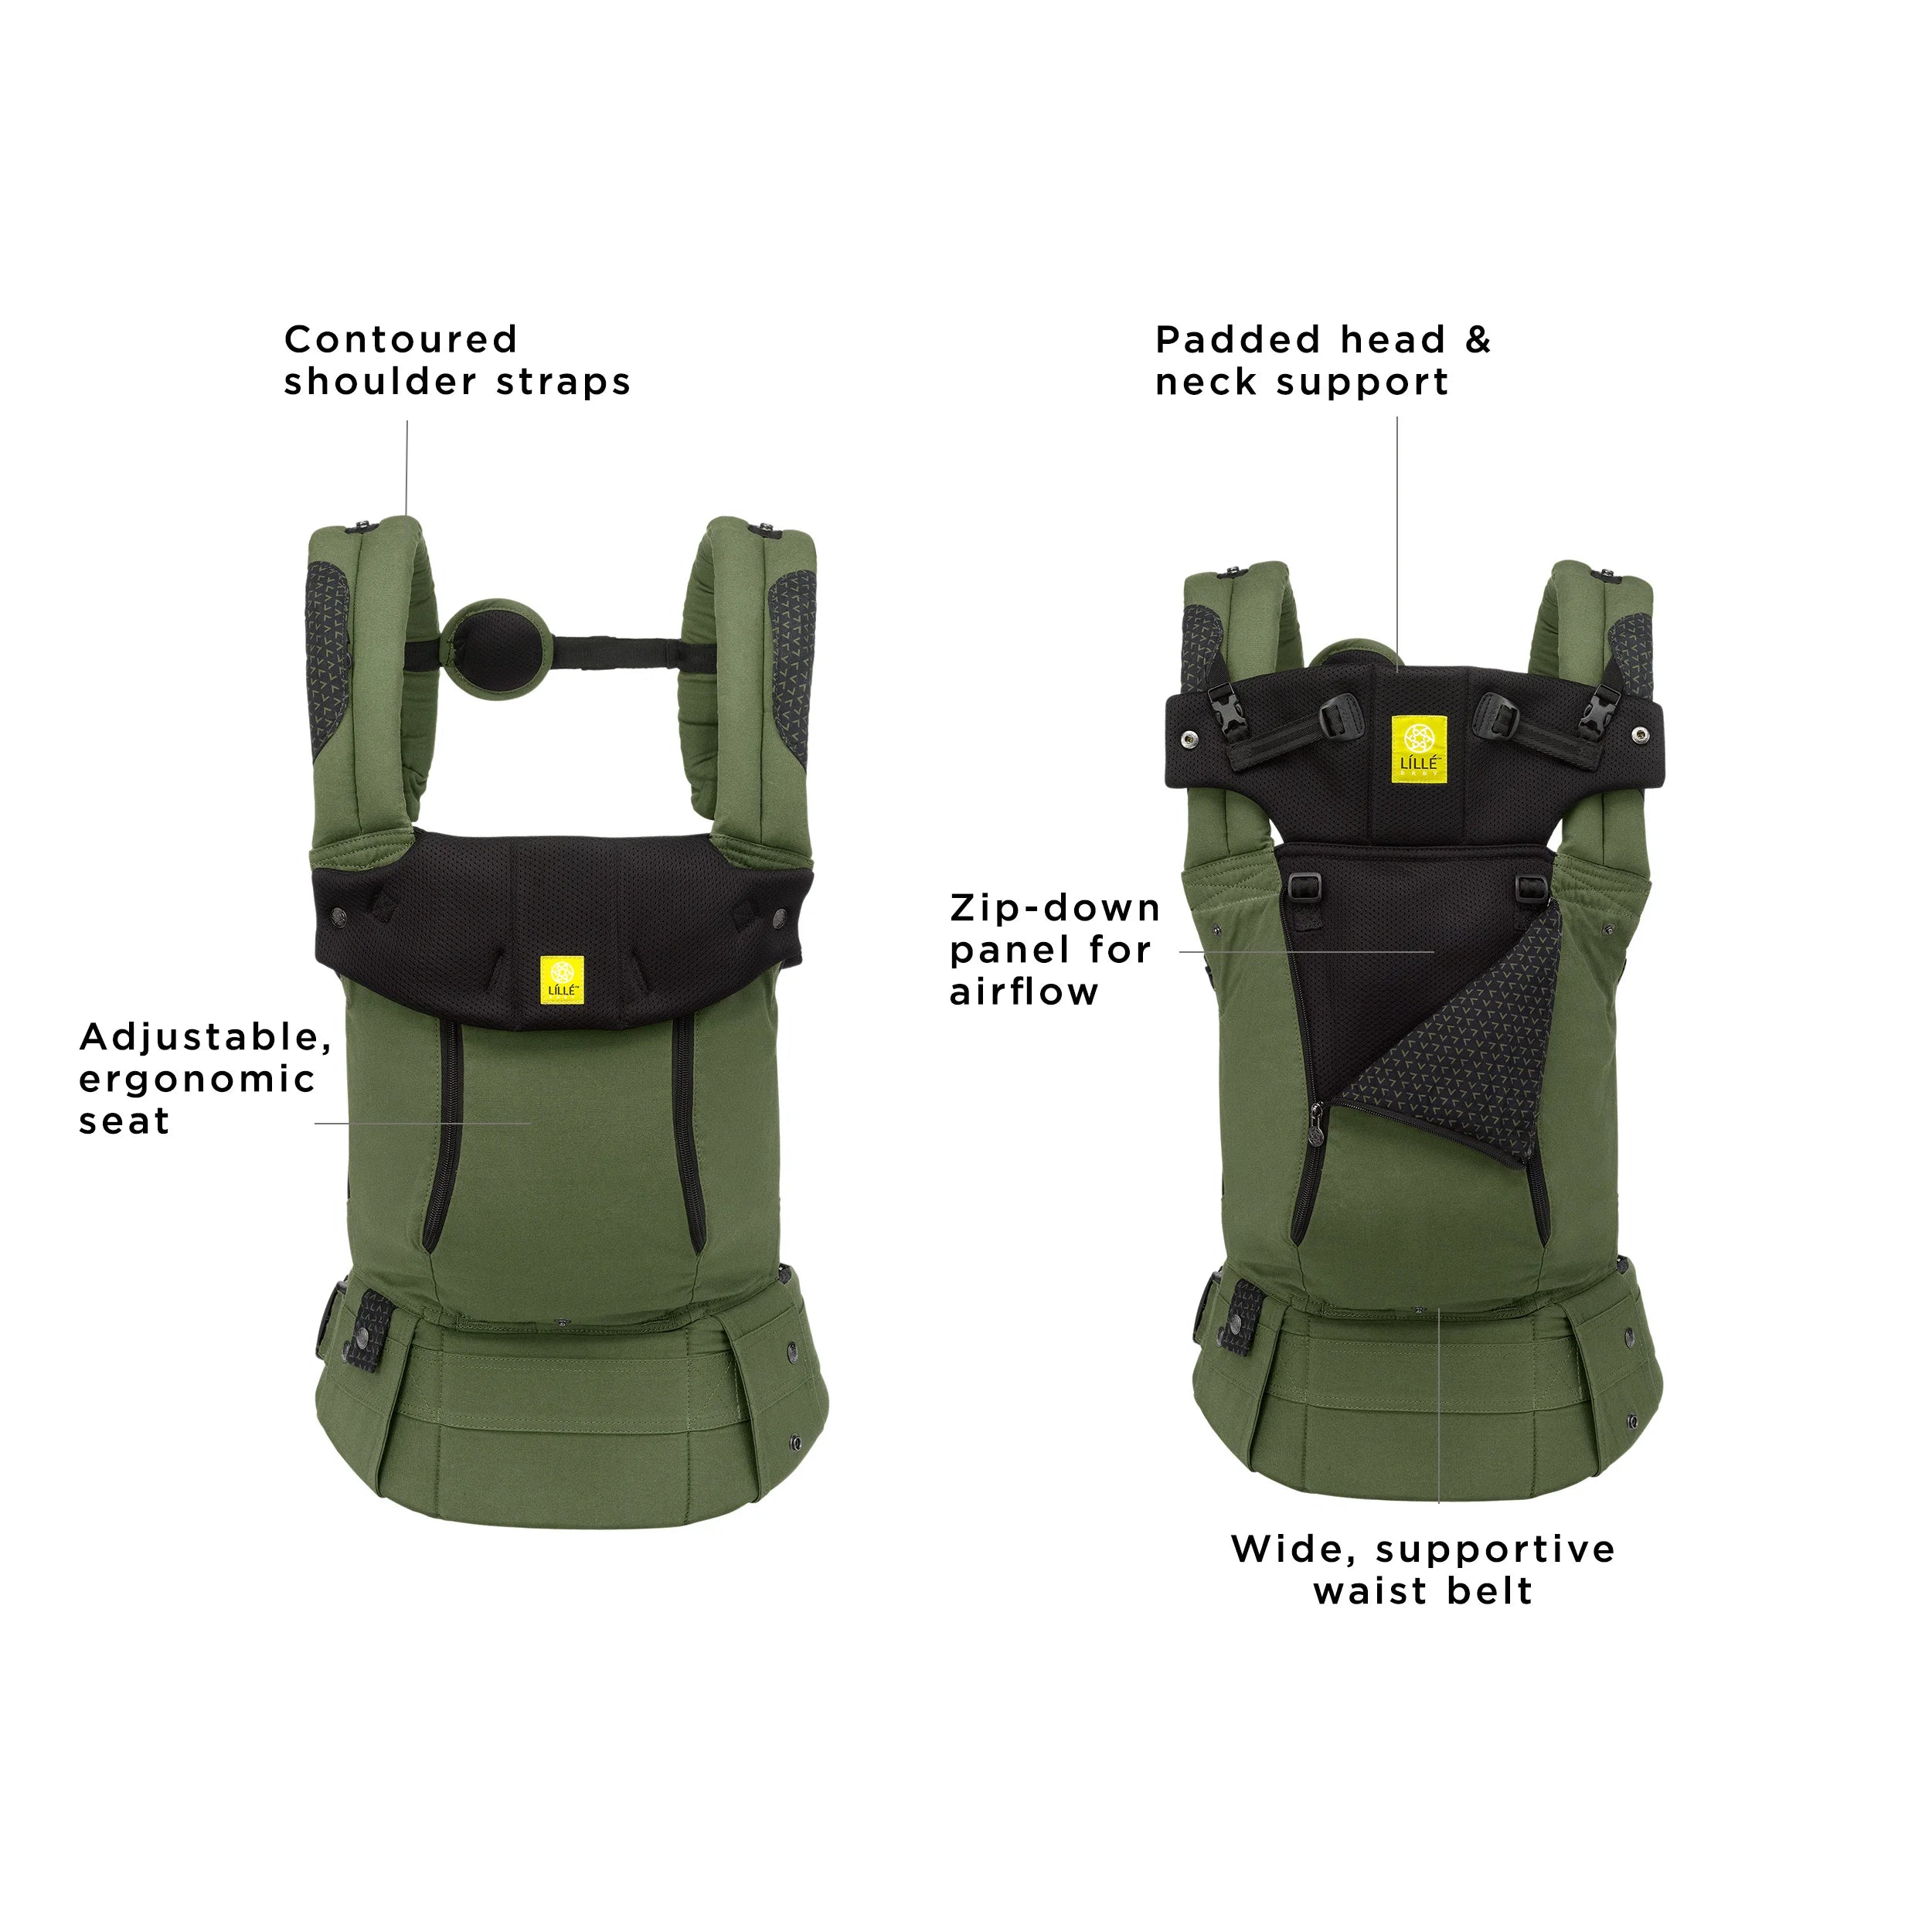 complete 6-in-1 all seasons has contoured shoulder straps, adjustable ergonomic seat, padded head & neck support, zip-down panel for airflow, and wide supportive waist belr